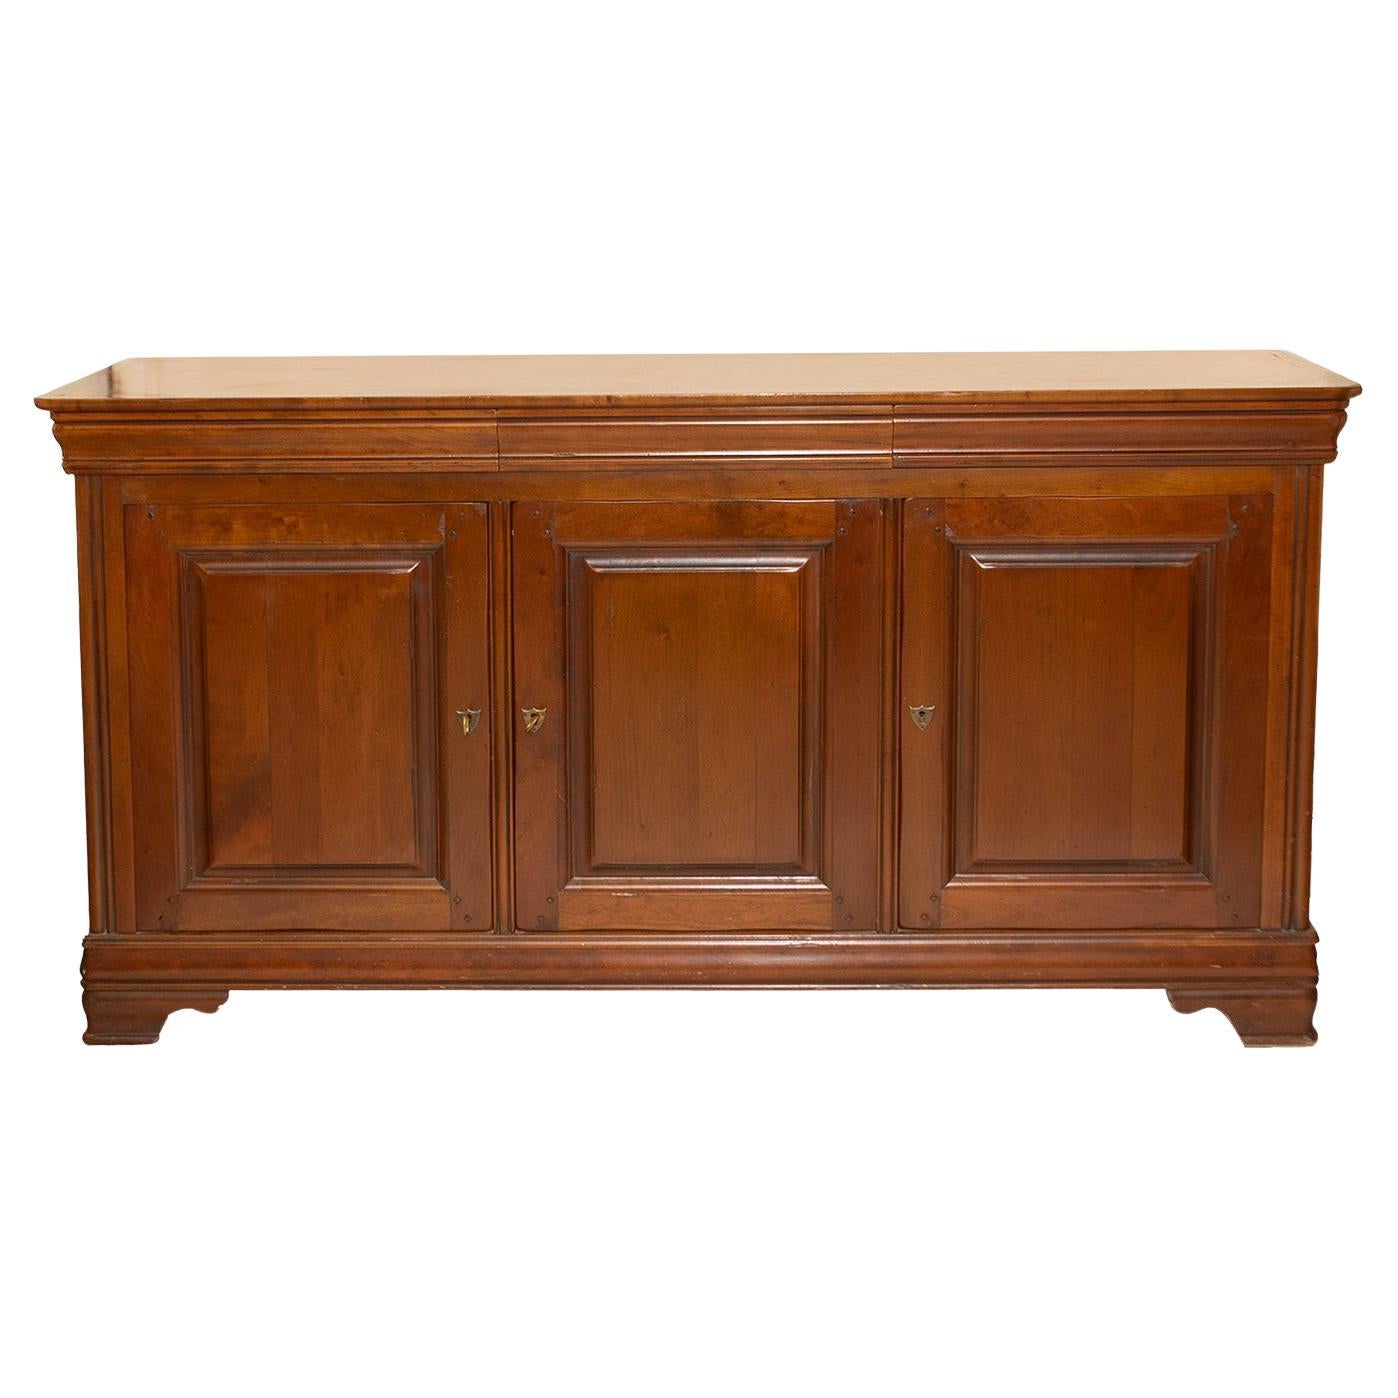 Antique French Louis Philippe Style Buffet in Walnut For Sale at 1stDibs